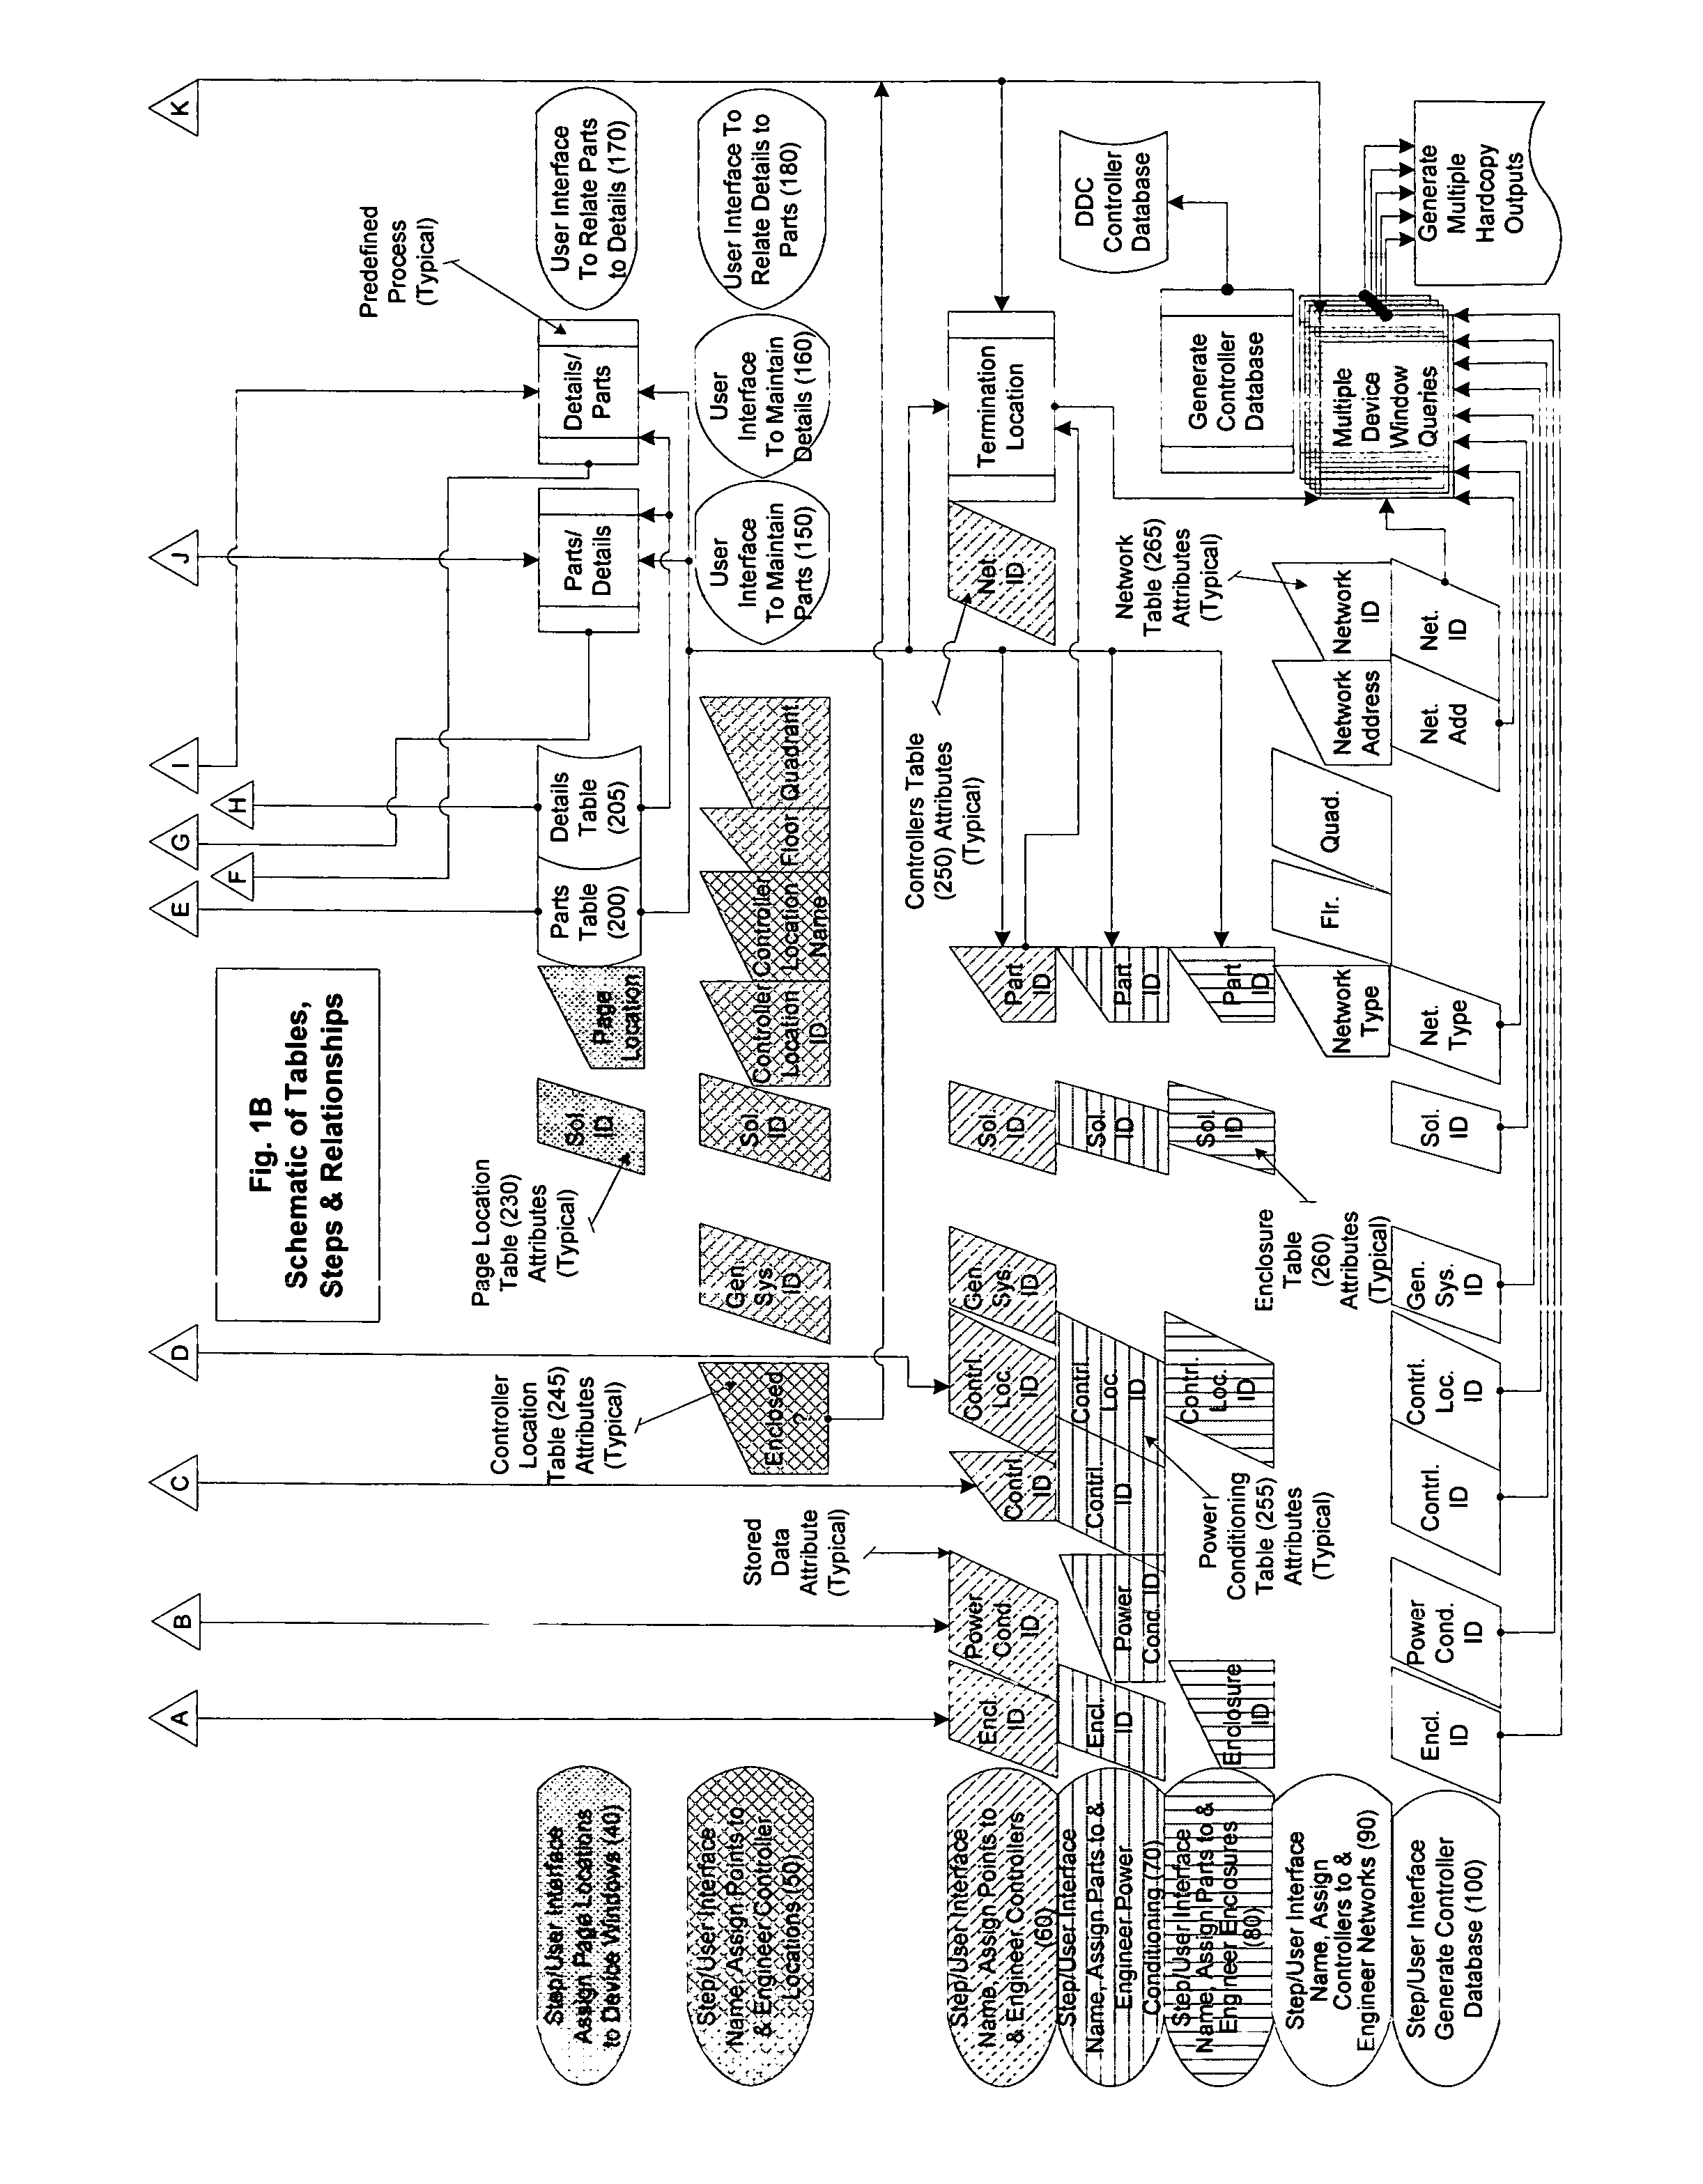 Method for engineering a control system